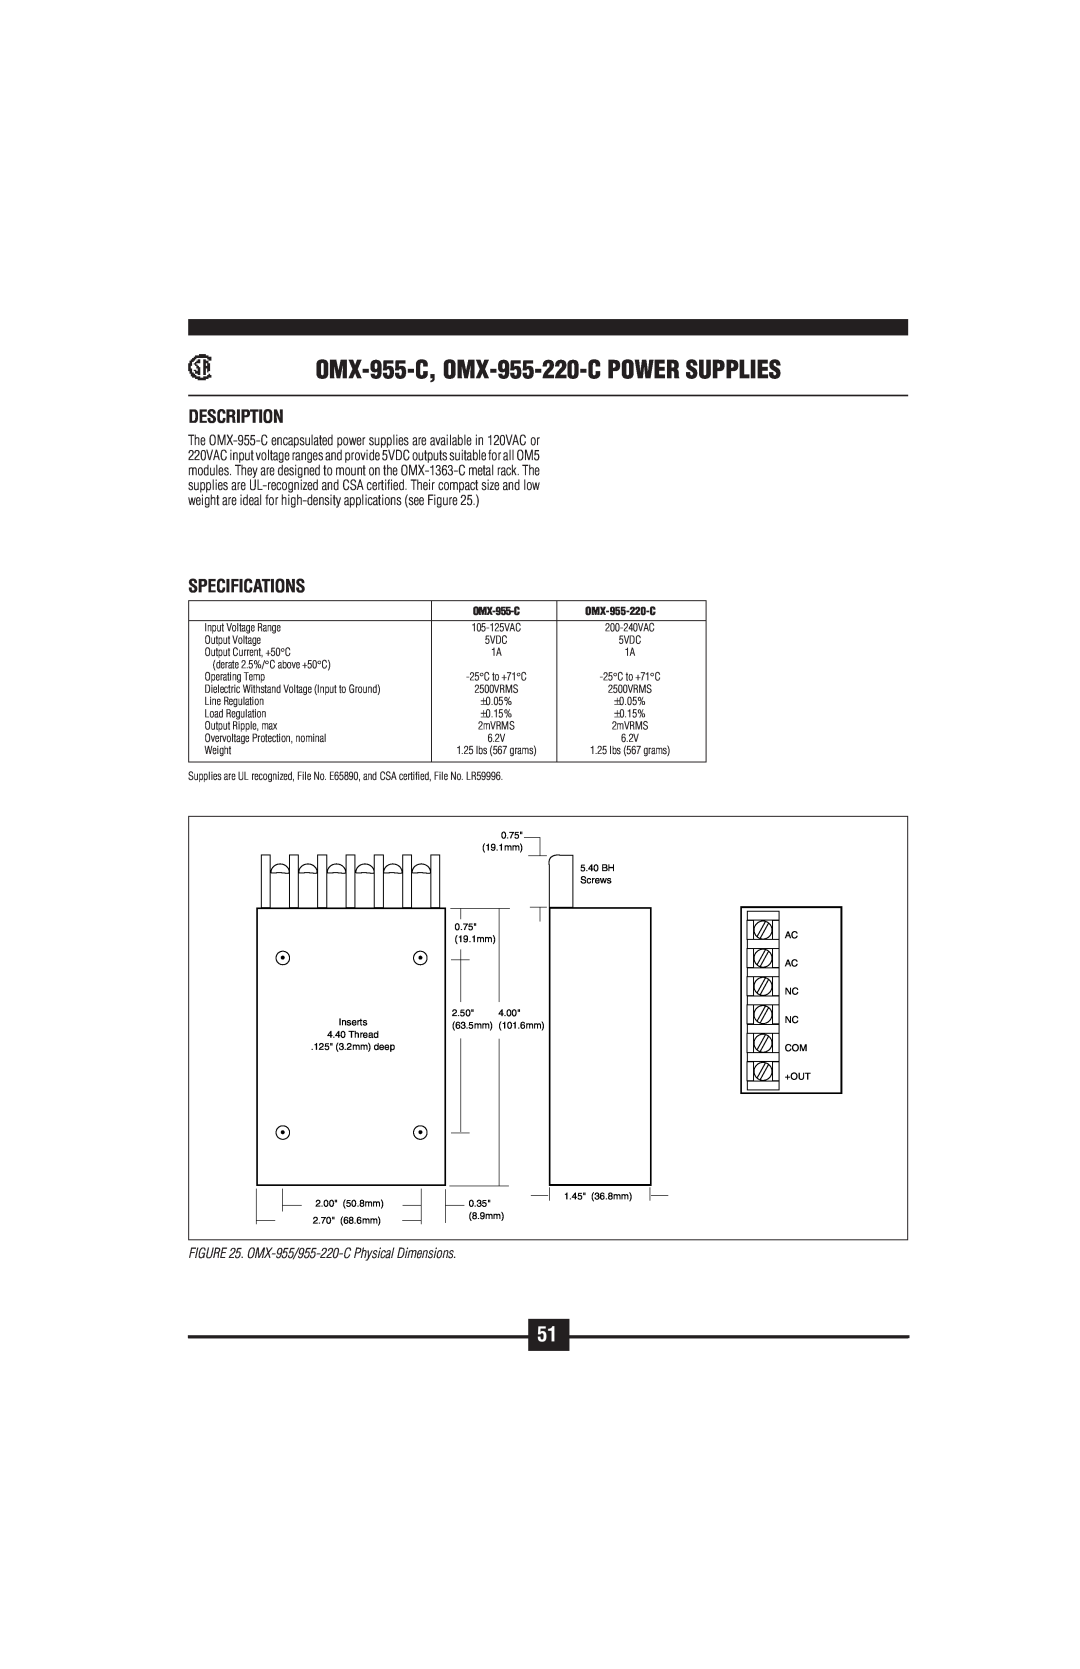 Omega Vehicle Security OM5-C manual OMX-955-C, OMX-955-220-CPOWER SUPPLIES, Description, Specifications 